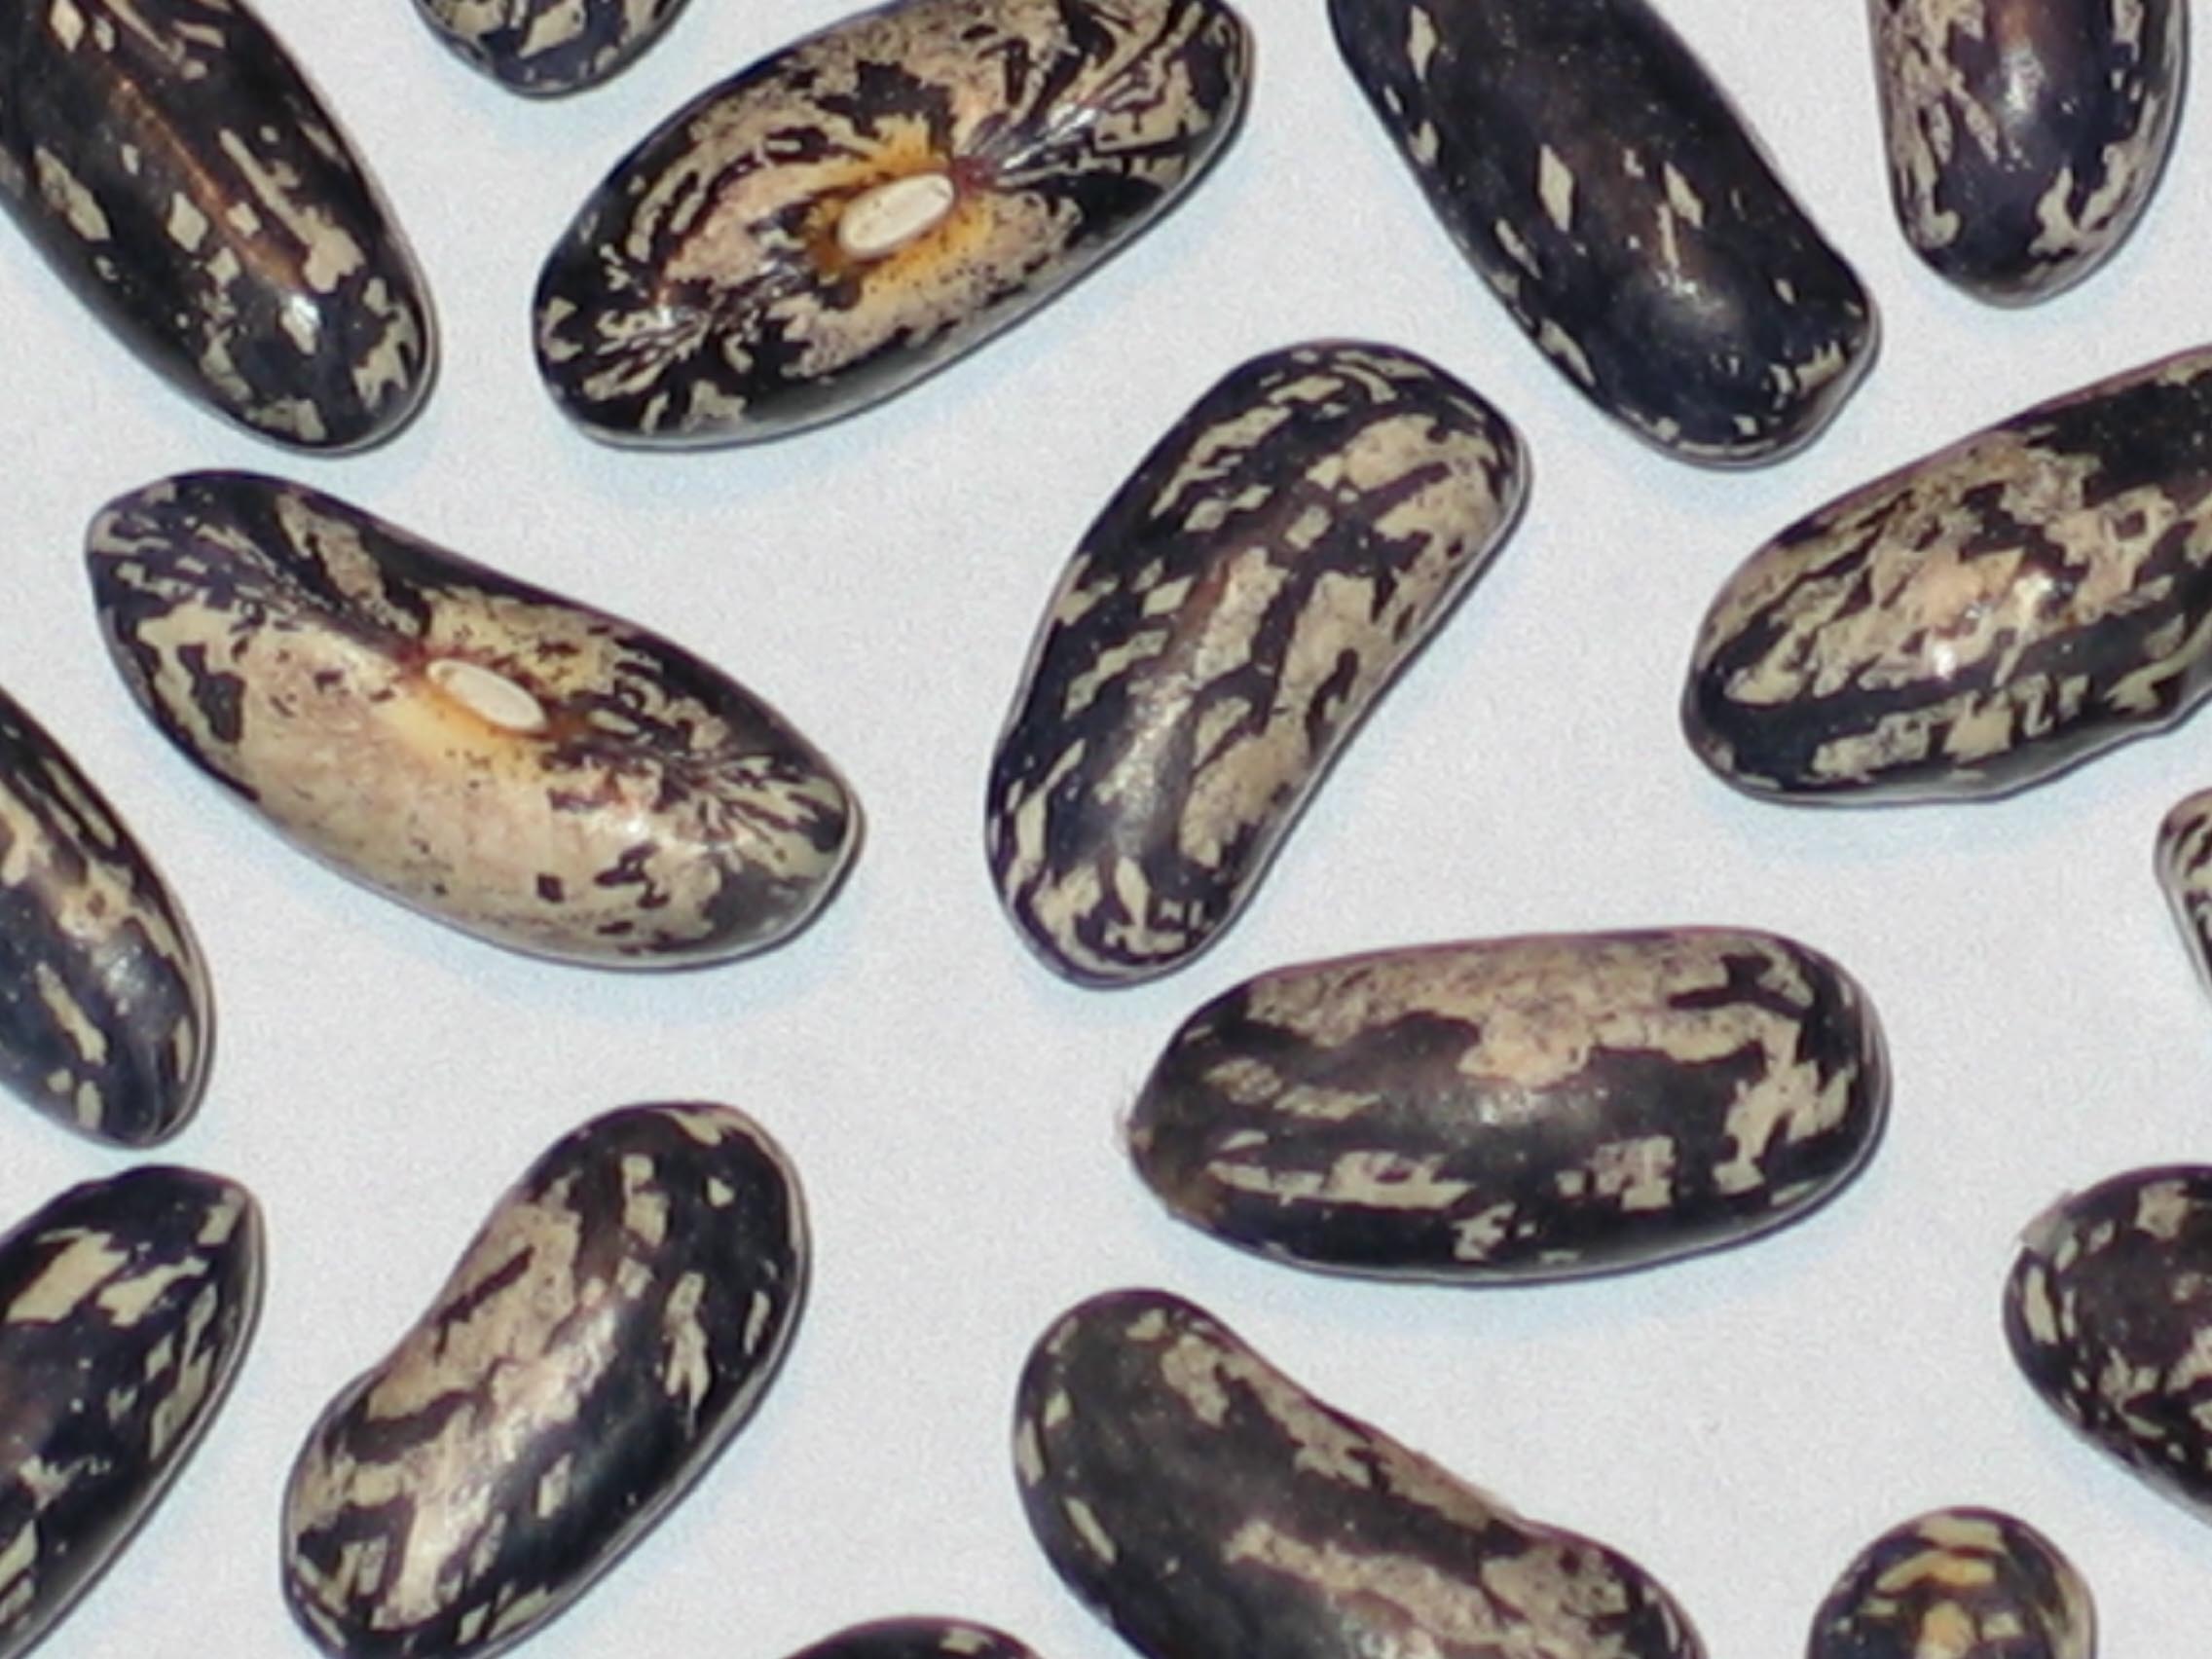 image of Bountiful Ester beans